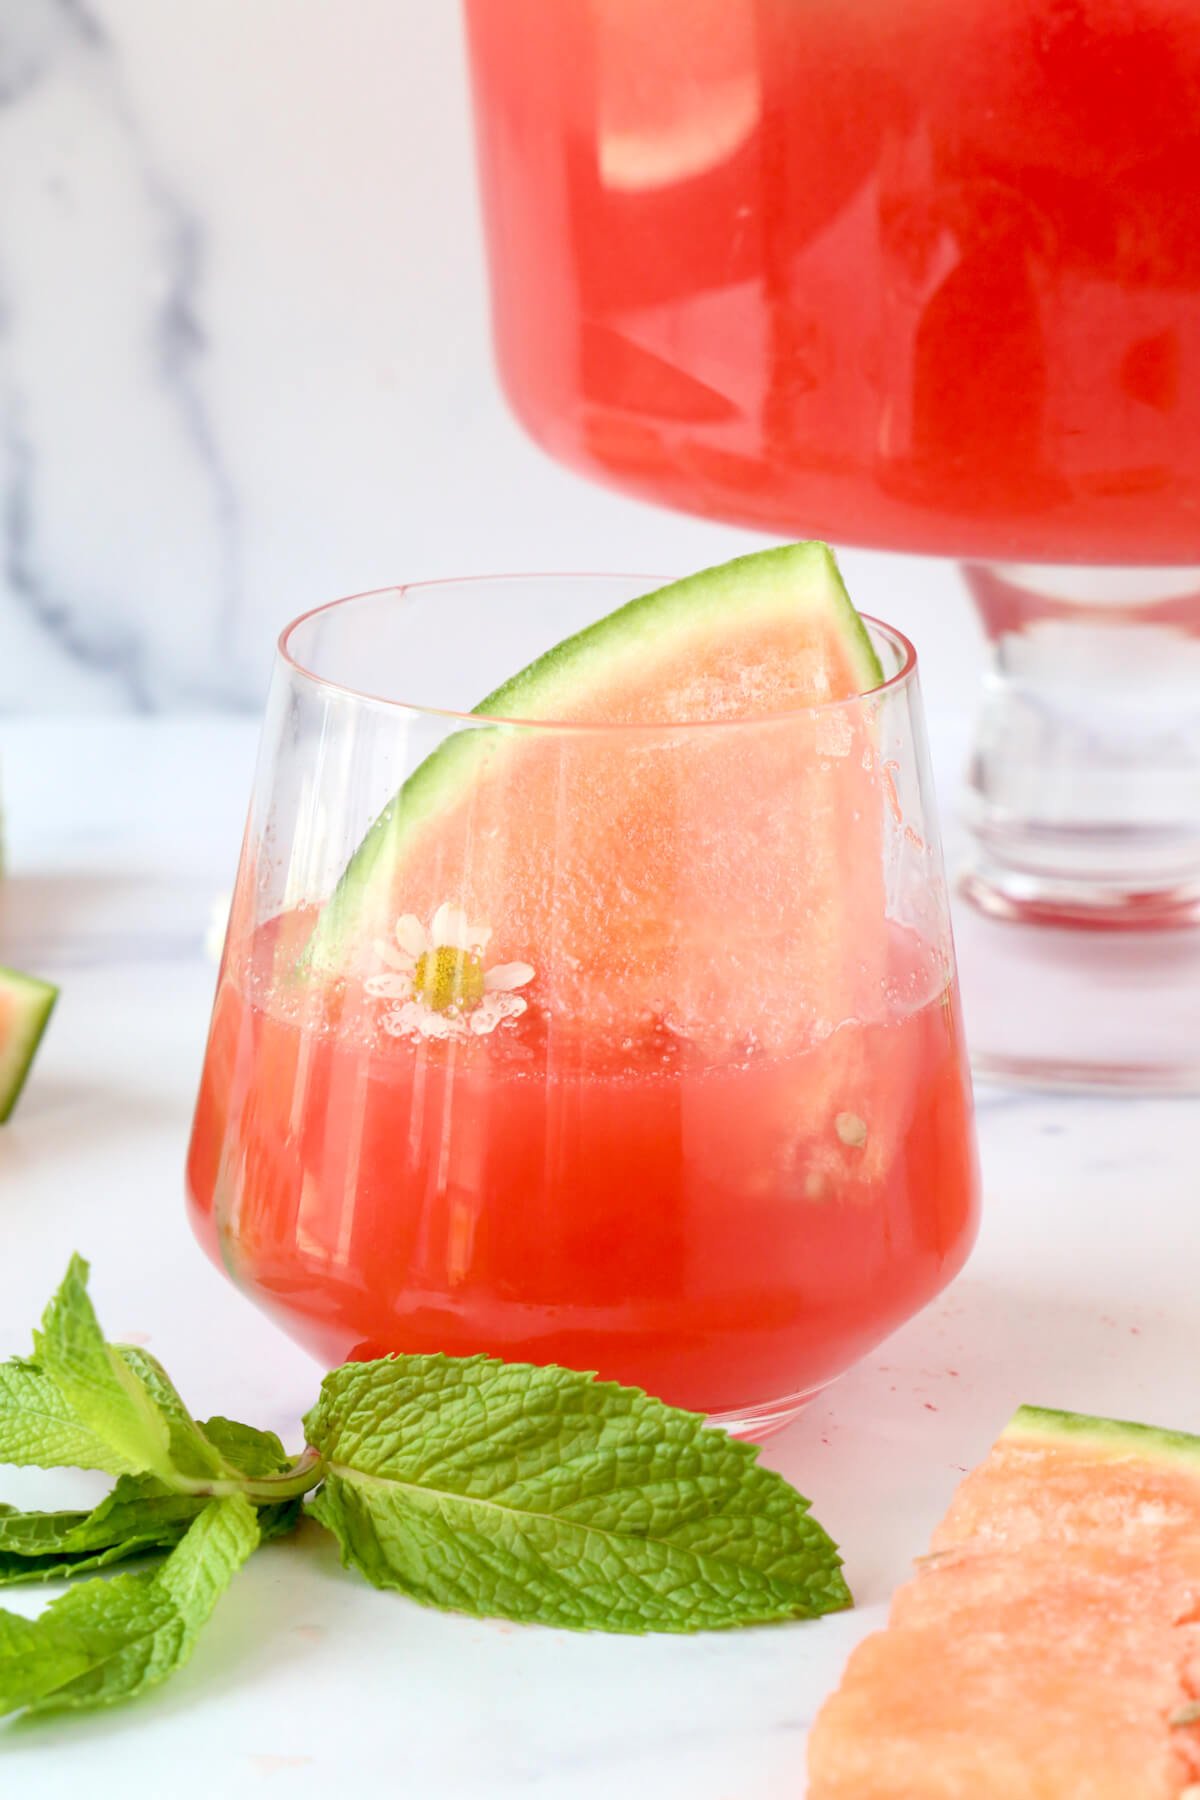 A glass filled with a red drink and a slice of watermelon and one white flower.  